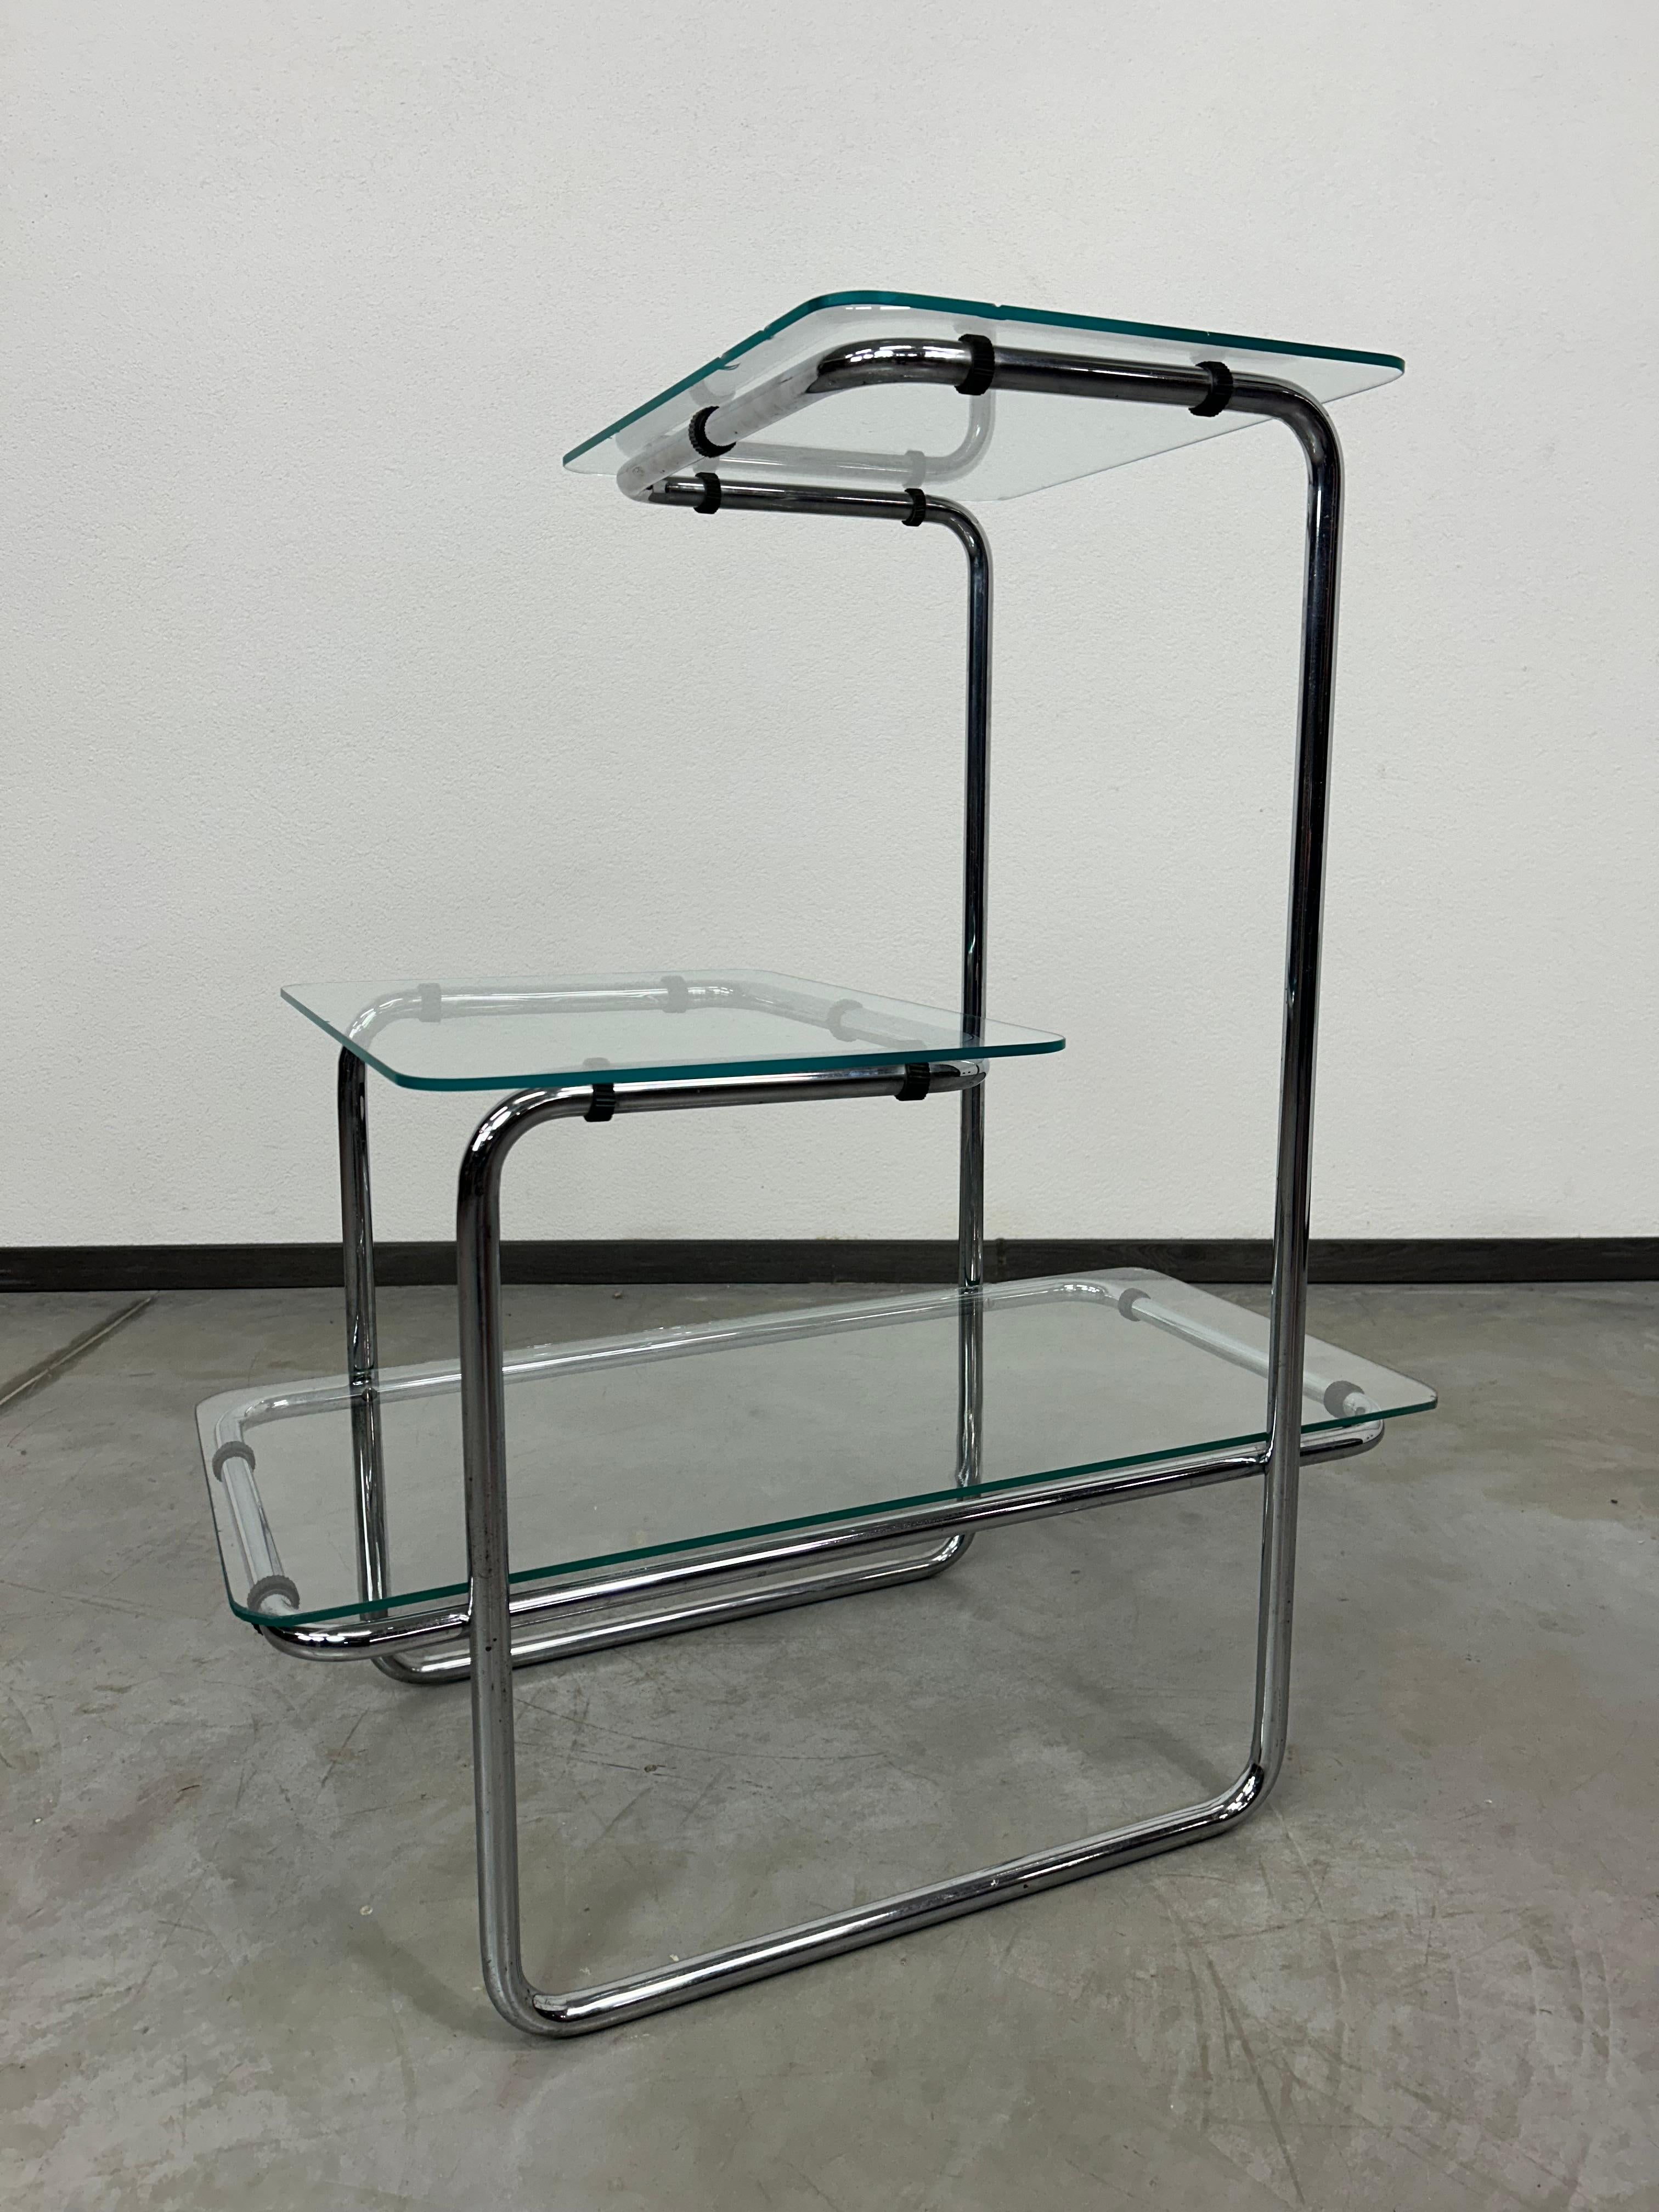 Art deco bauhaus tubular flower stand B136 by Emile Guyot in original condition. All chrome parts are in 99% condition. Small edges on glass parts. 